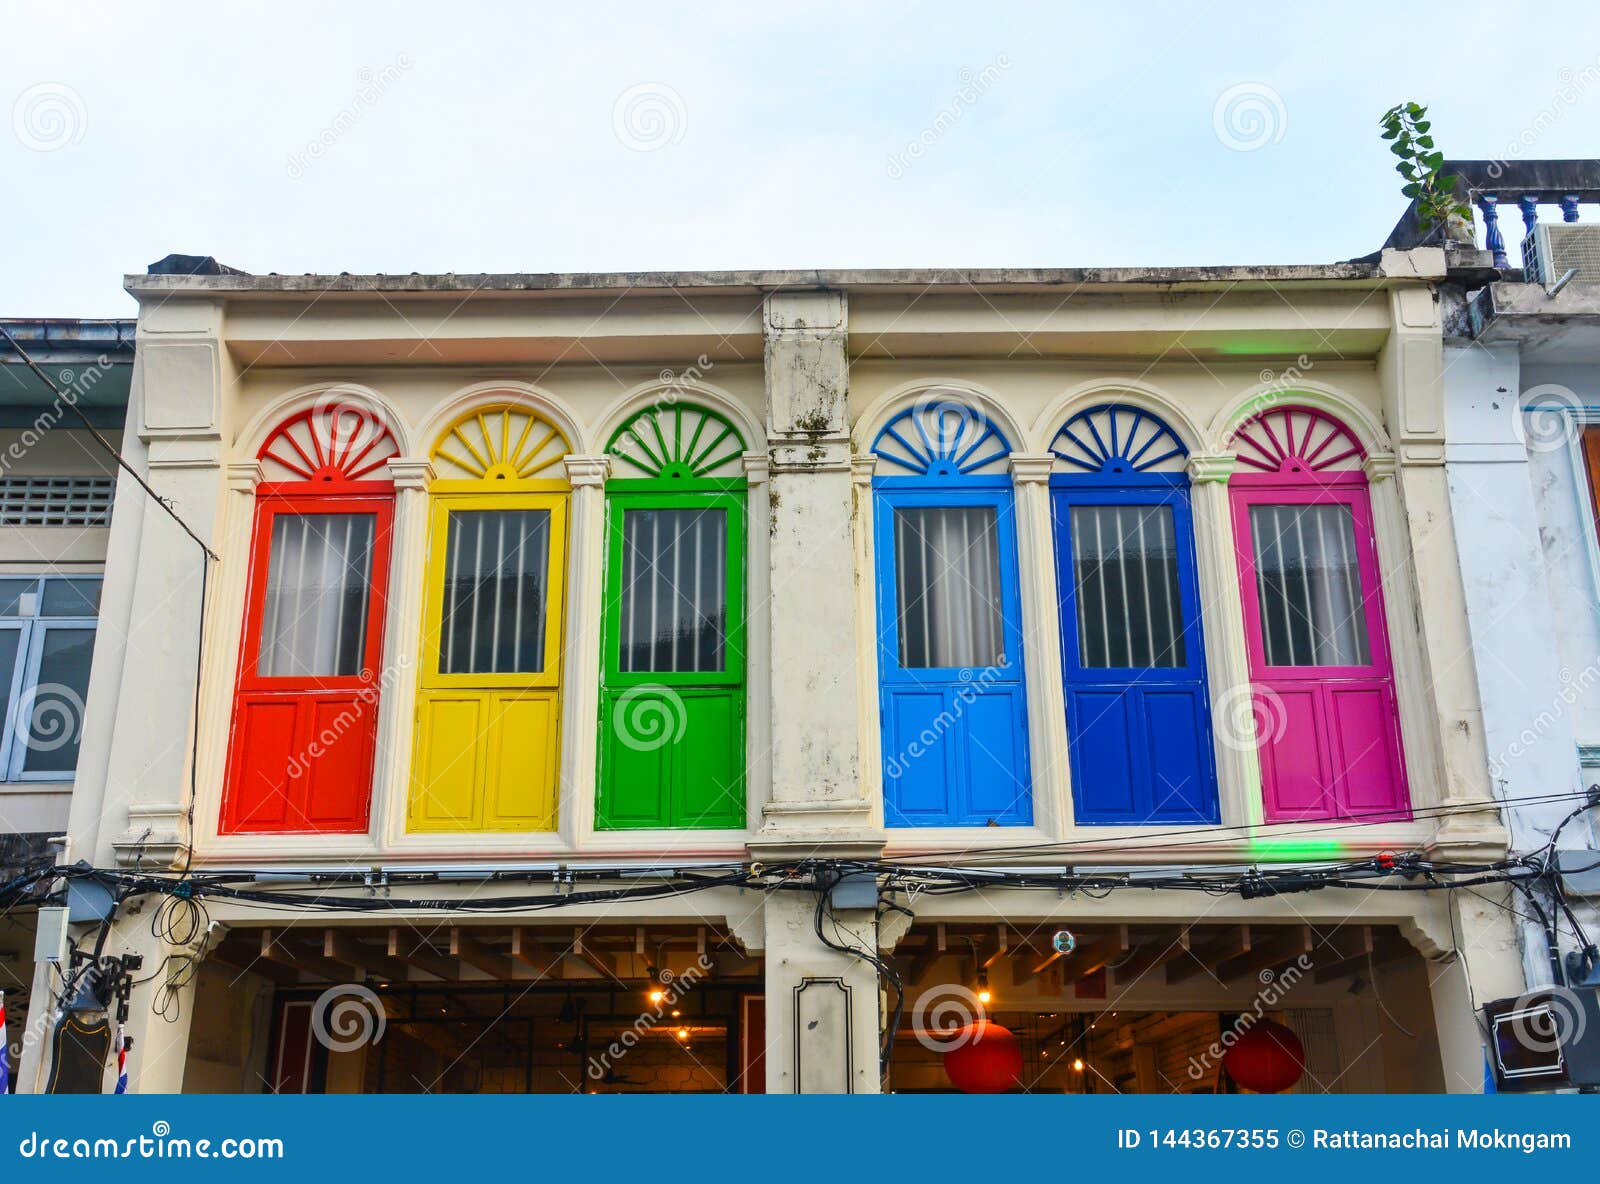 color window in chino-portuguese style, phuket thailand